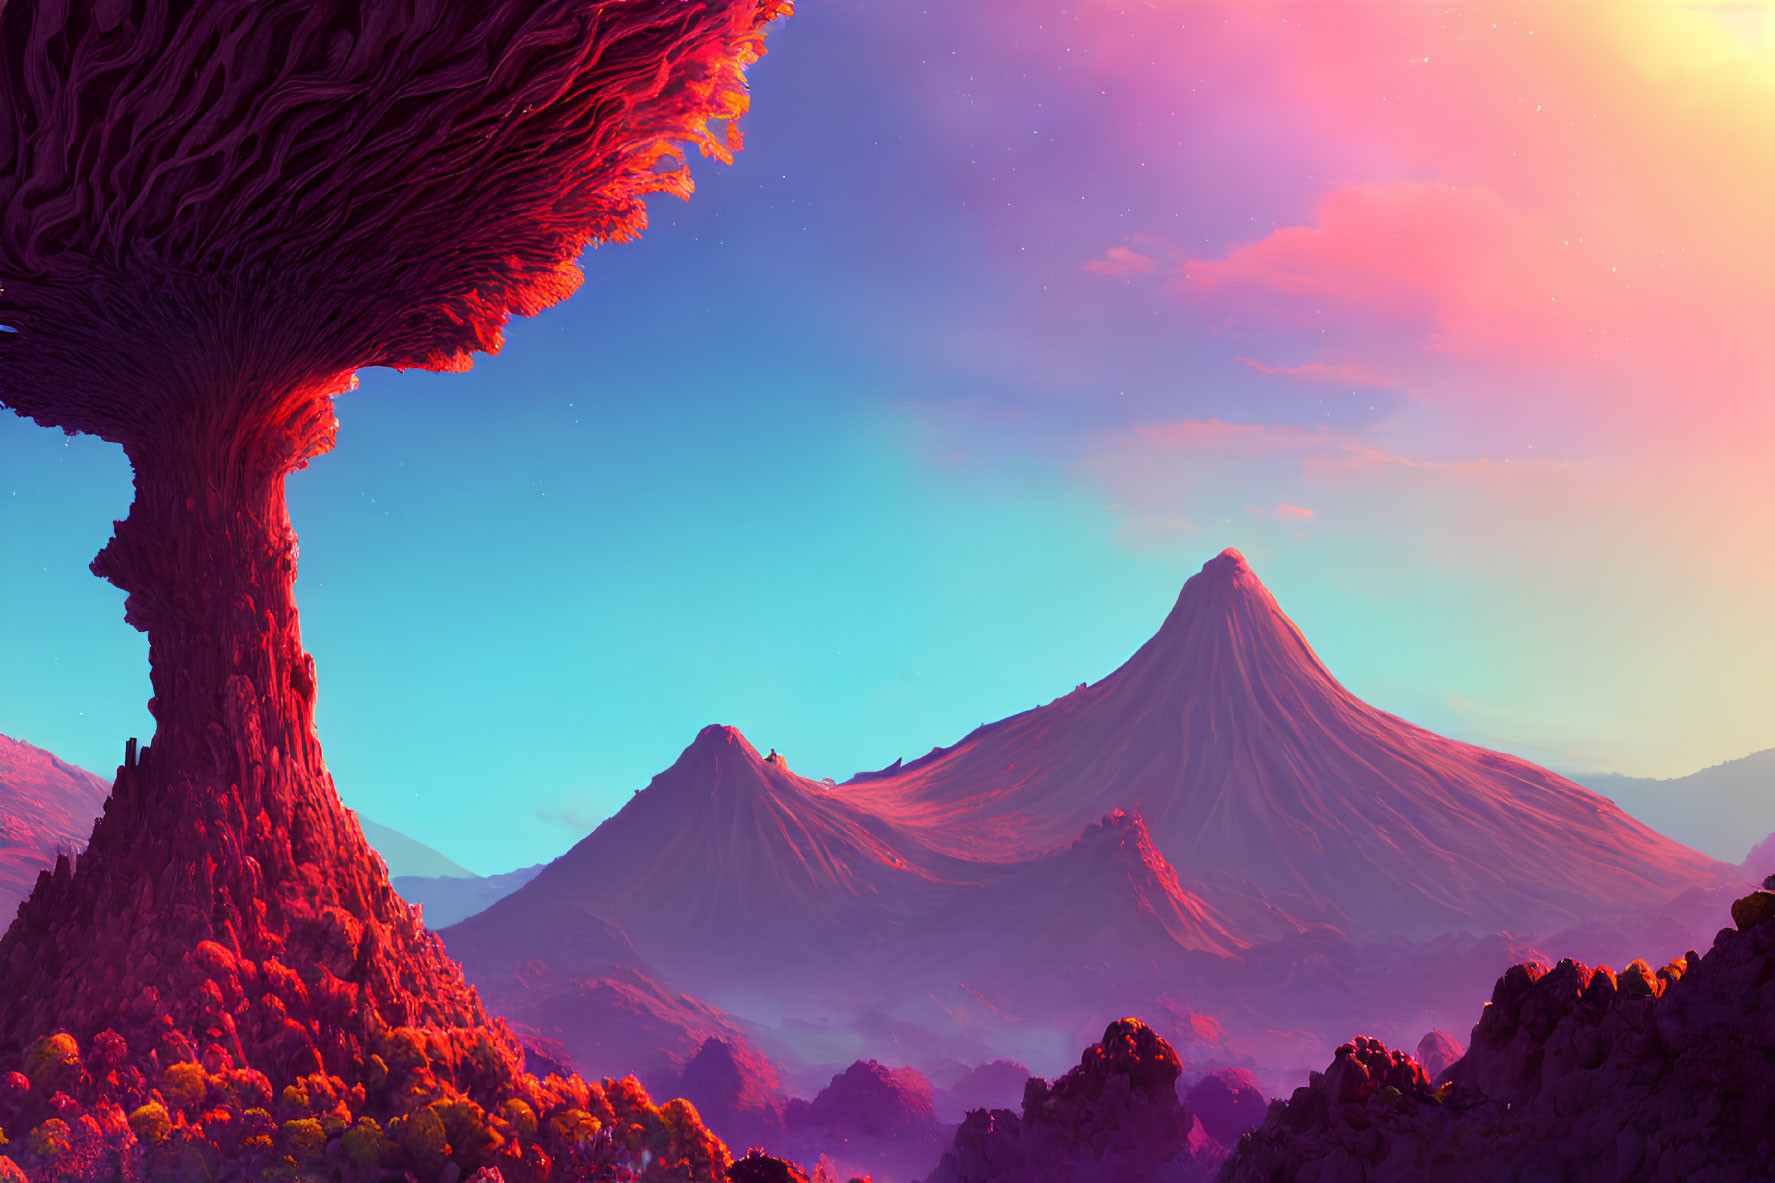 Alien landscape with colossal tree and twin volcanic peaks at twilight